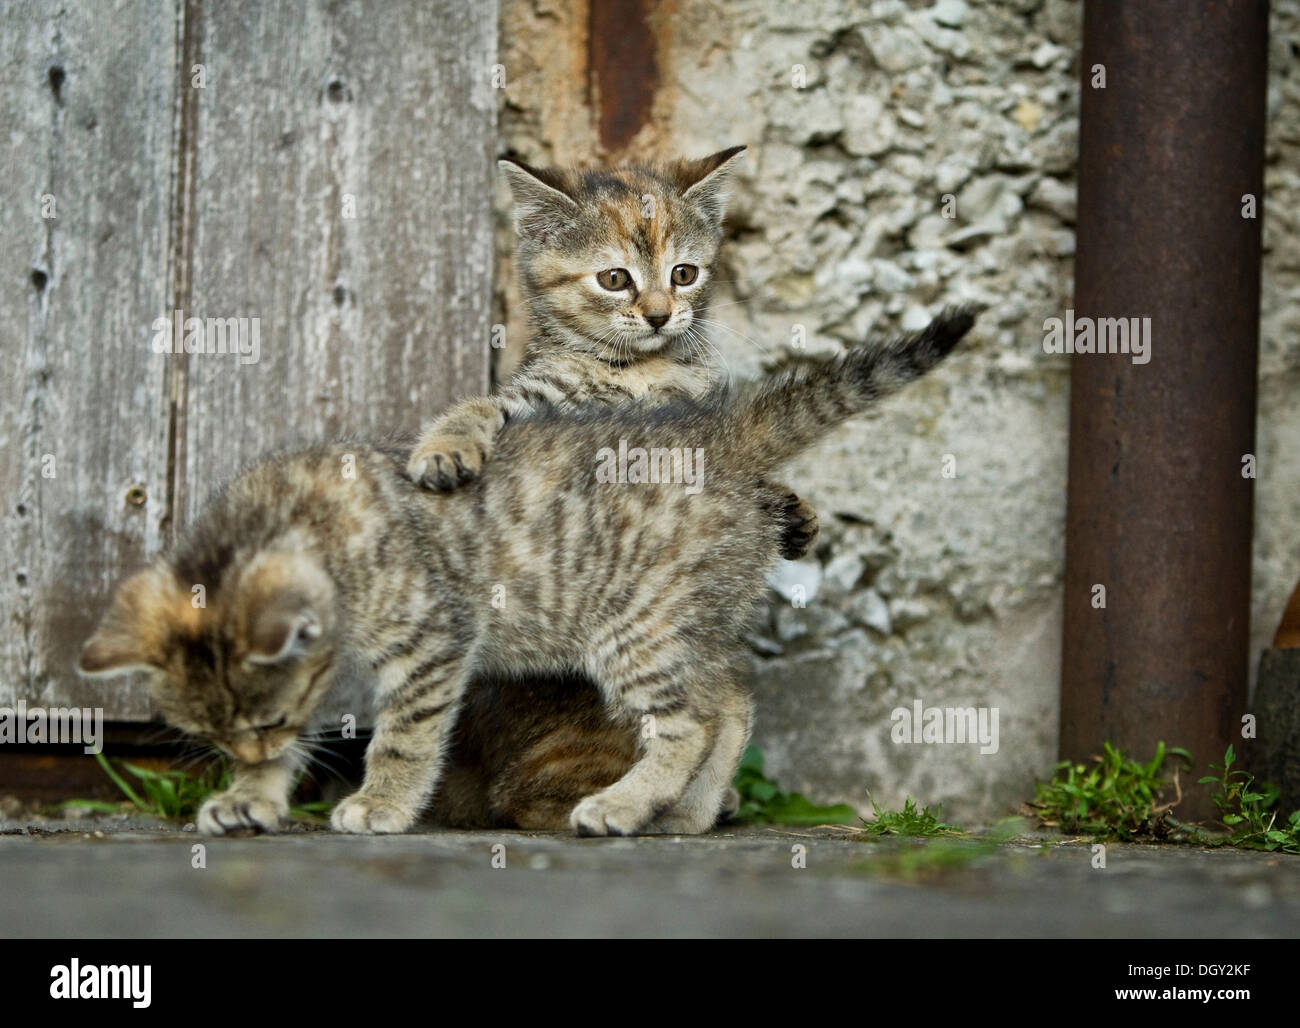 Two brown-tabby kittens, farm cats, playing in front of a barn door, Satteldorf, Hohelohe, Baden-Württemberg, Germany Stock Photo